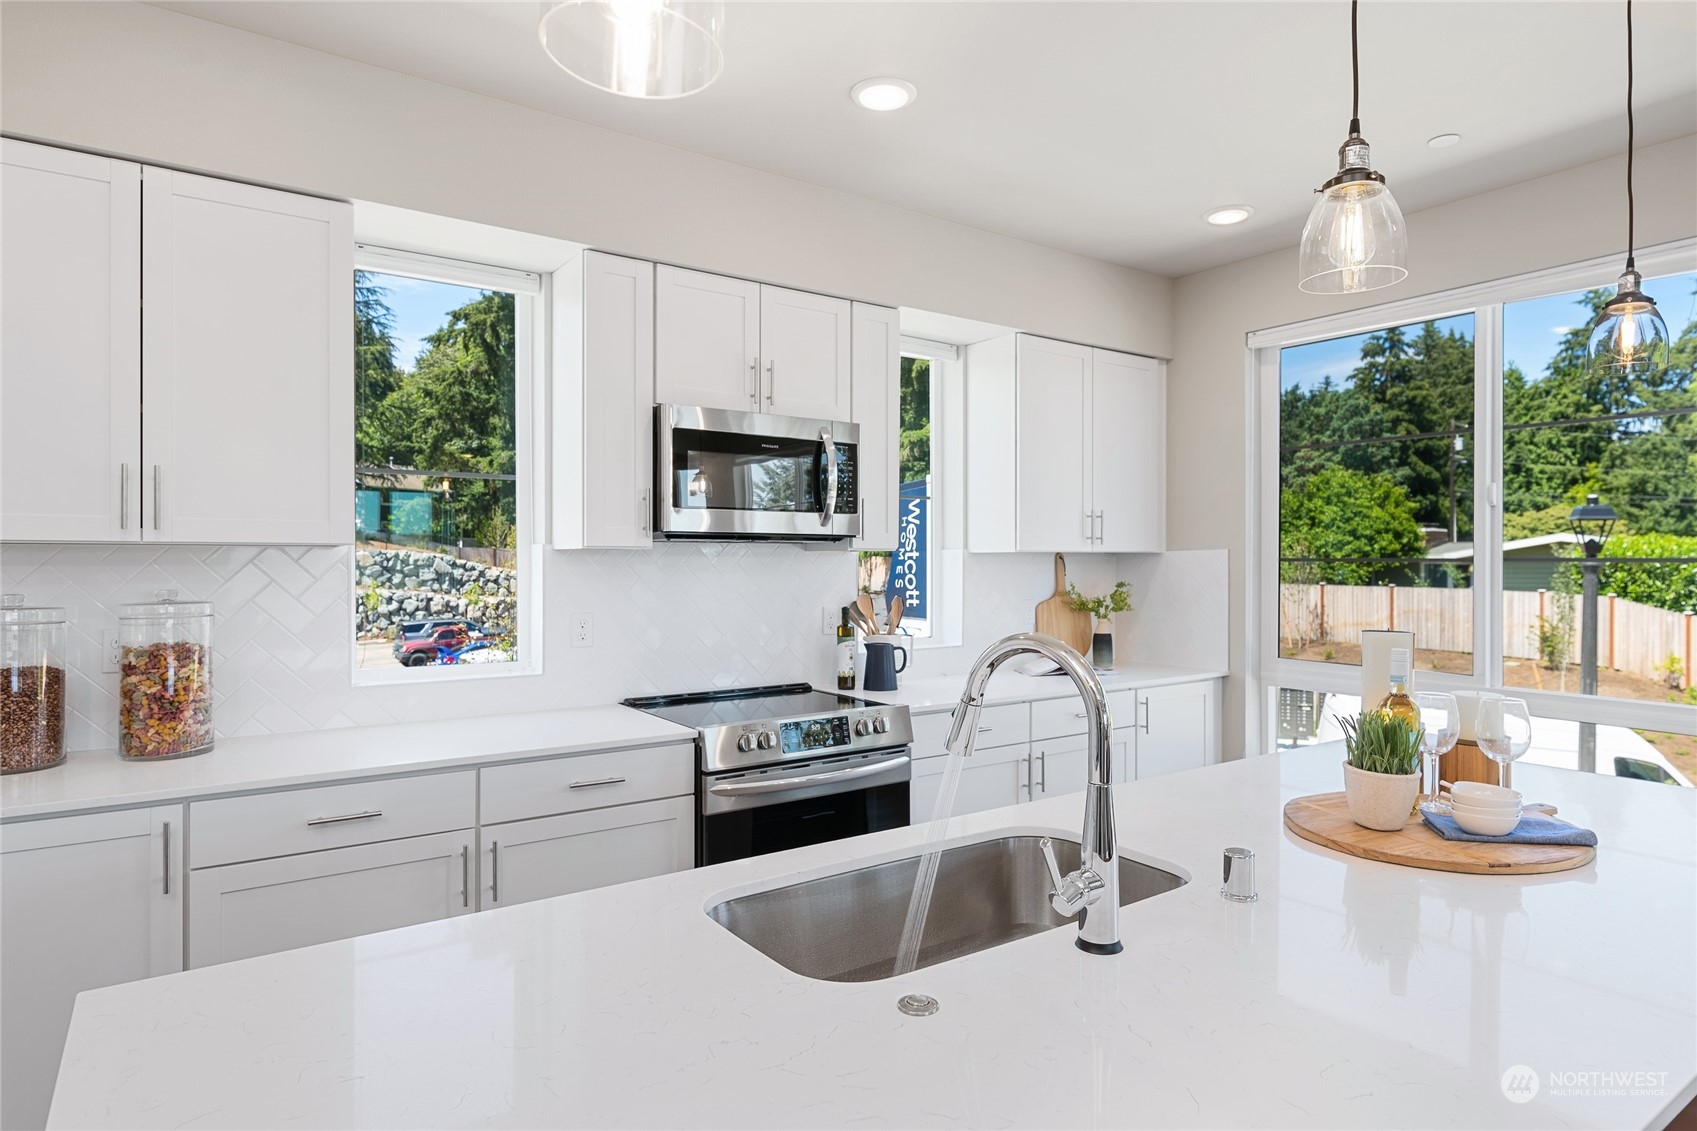 a kitchen with stainless steel appliances granite countertop a sink stove and white cabinets with wooden floor